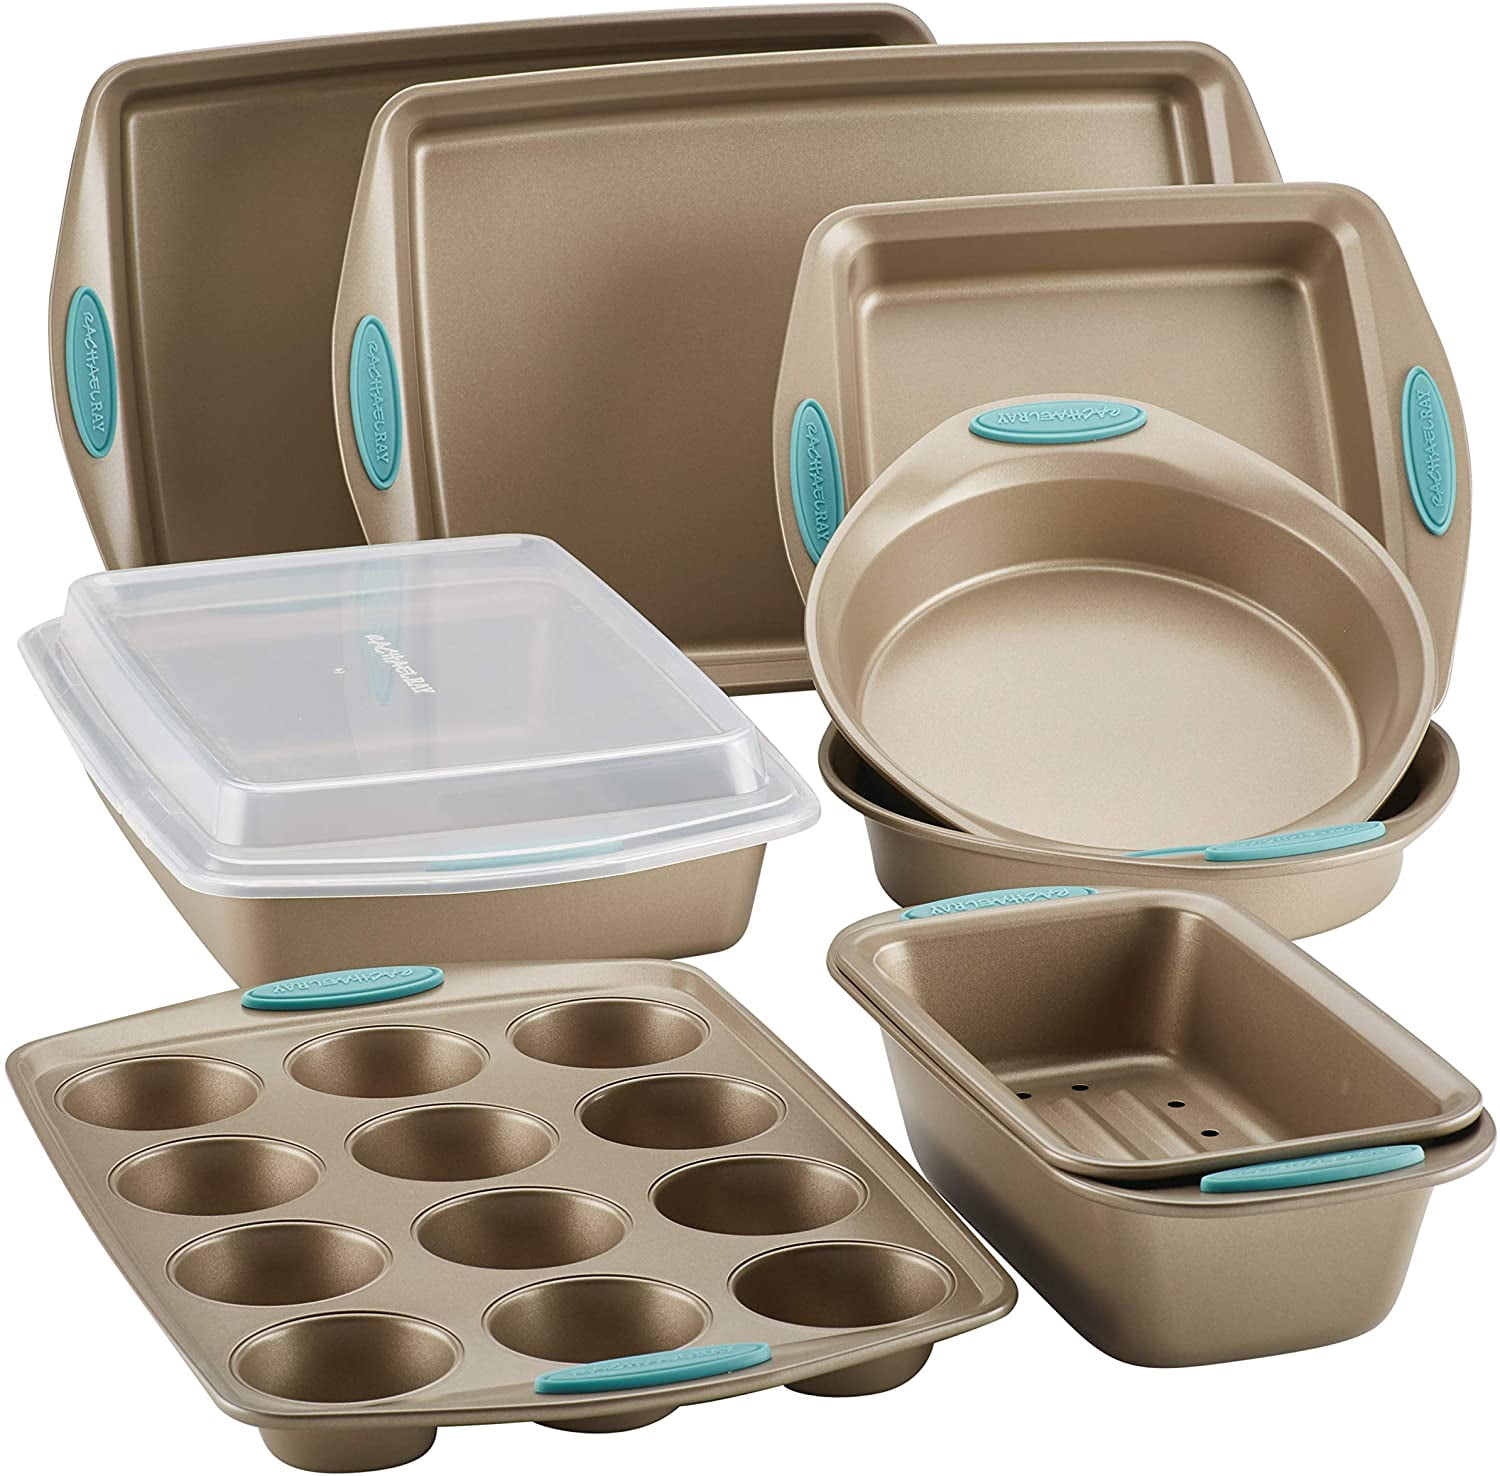 NEW in BOX Rachael Ray Cucina 4-pc Bakeware Set Silicone Grips Nonstick 